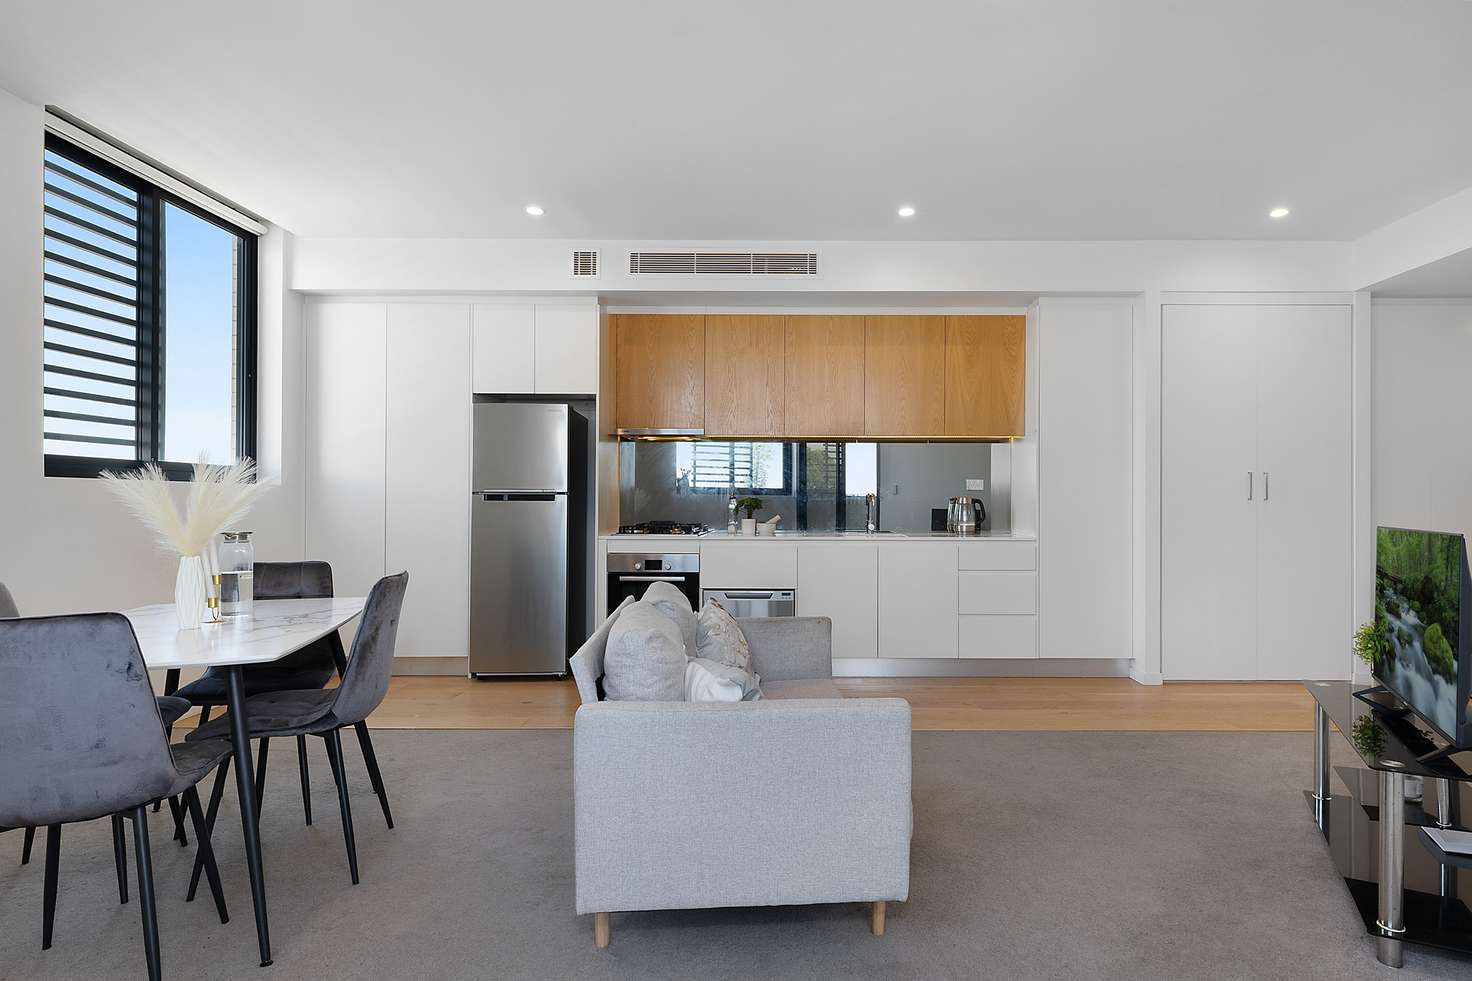 Main view of Homely apartment listing, 308/165 Frederick Street, Bexley NSW 2207